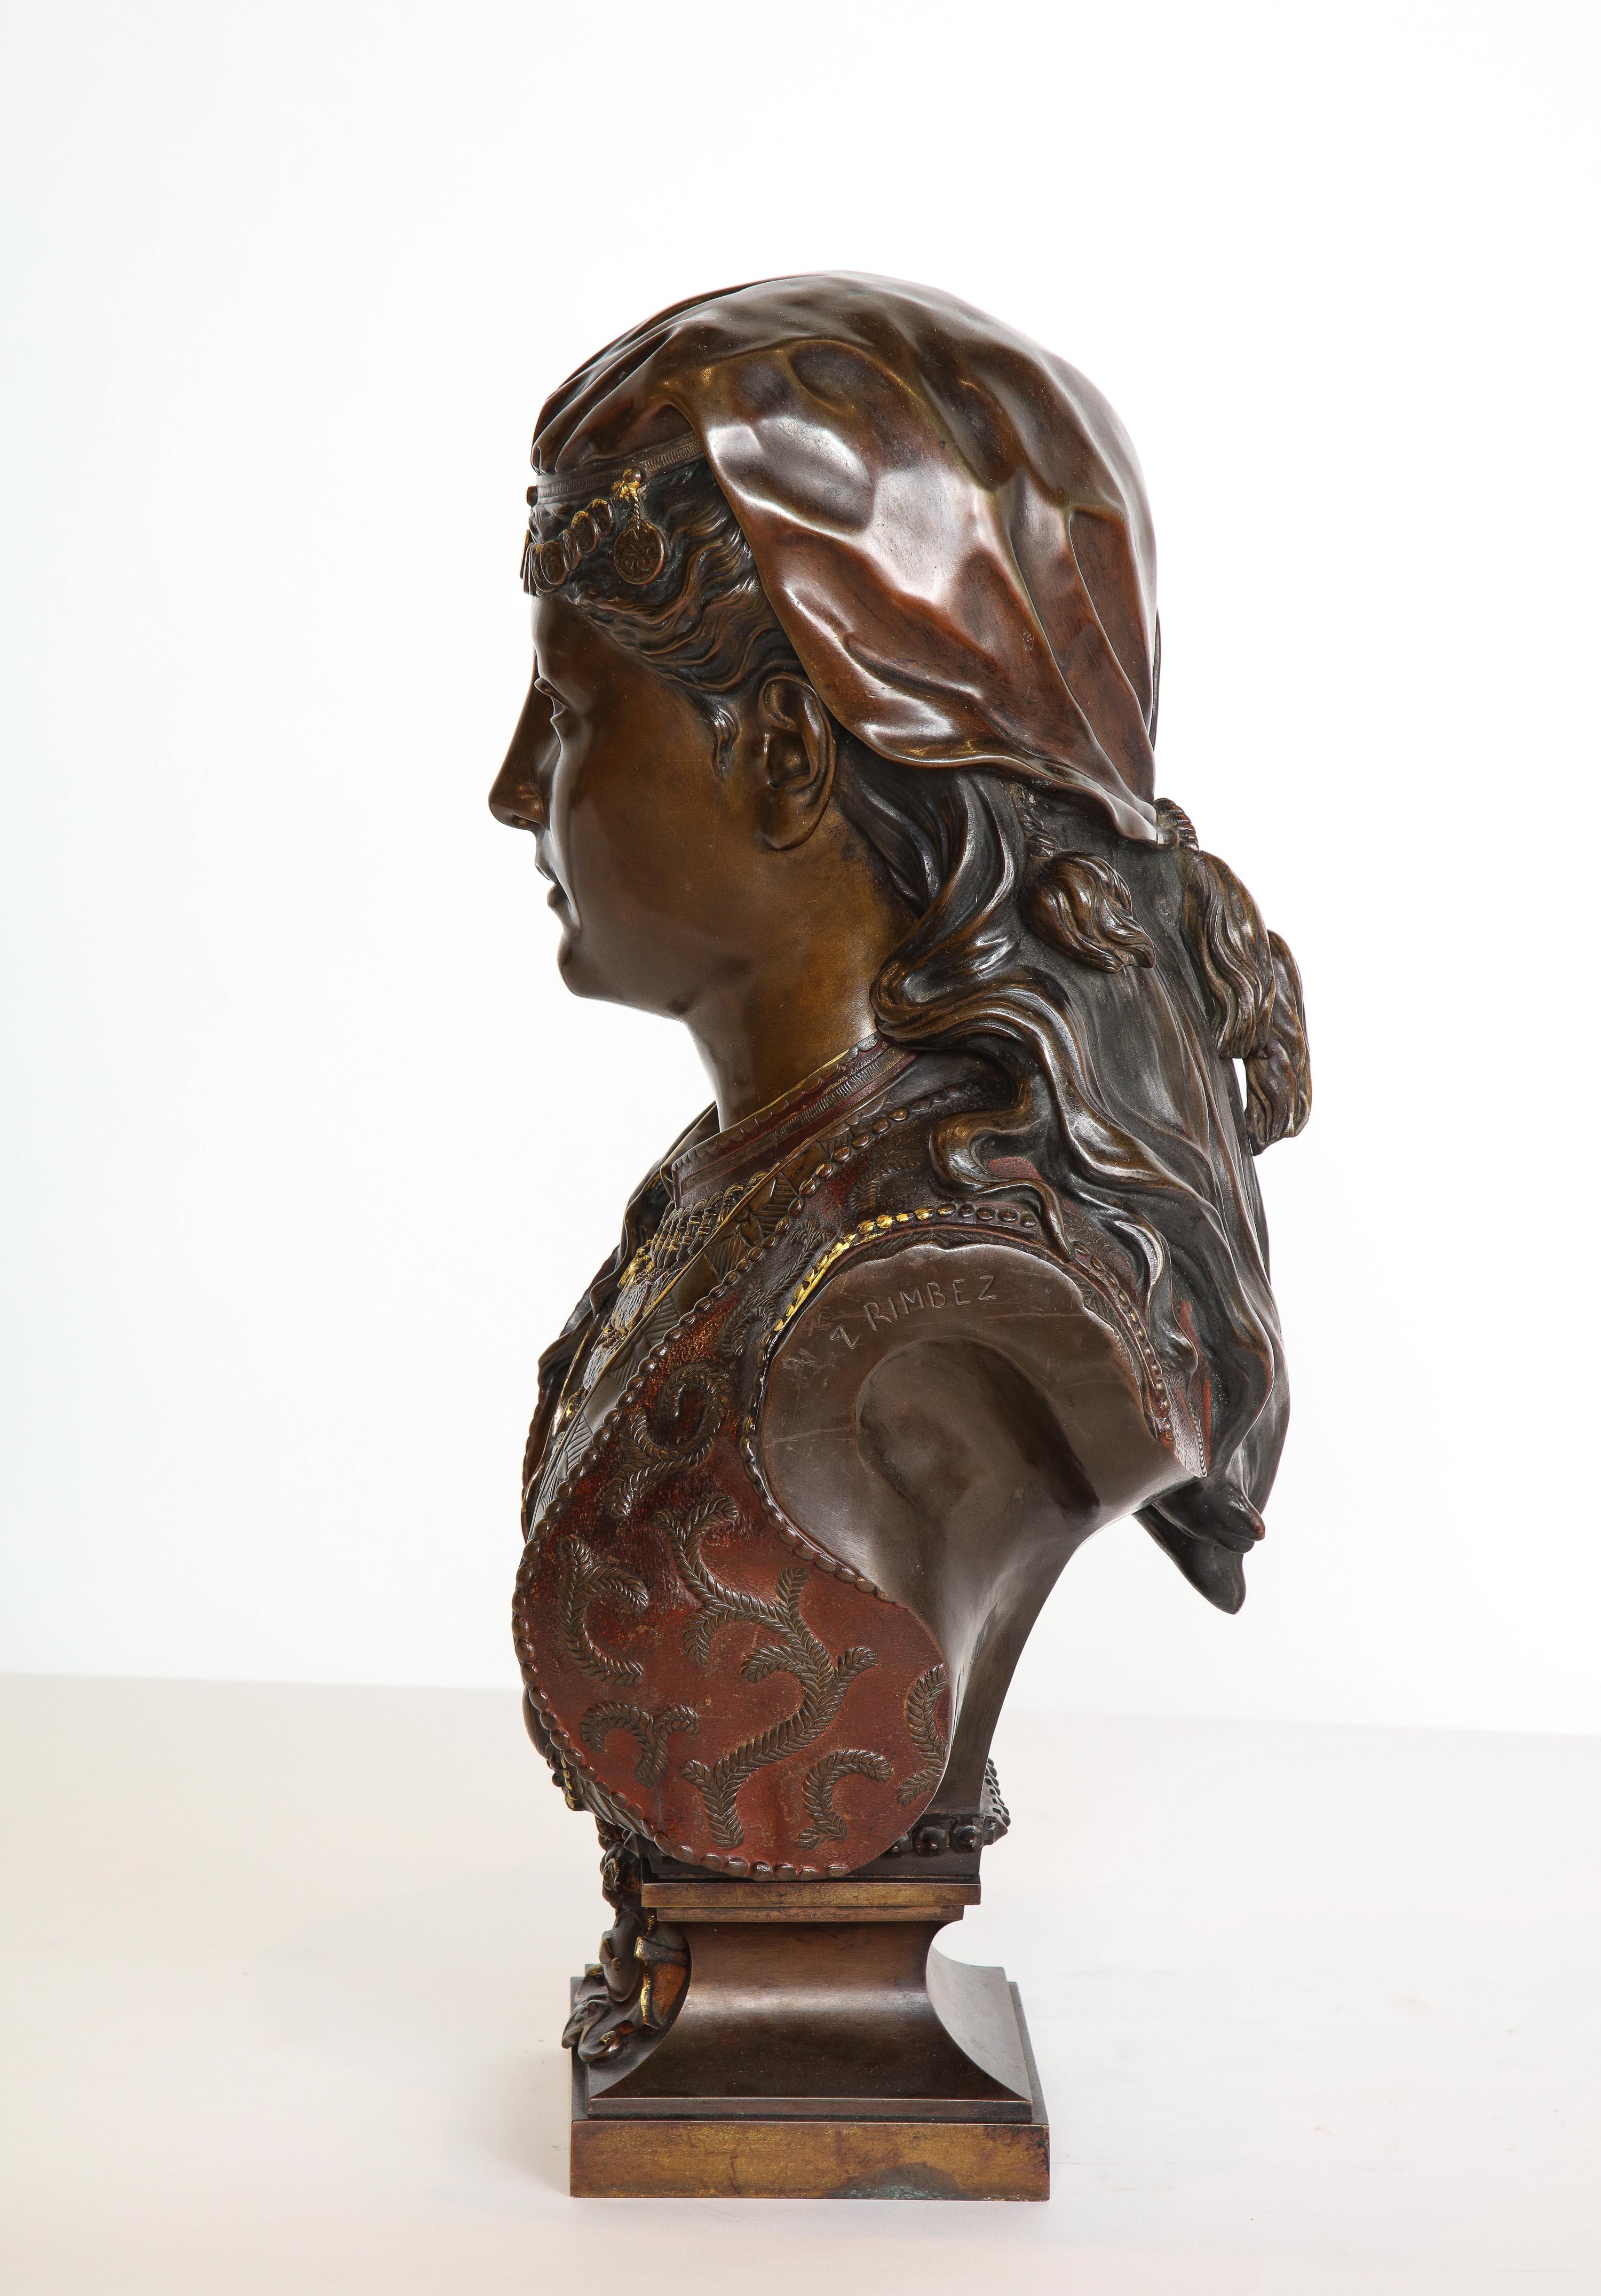 Islamic Exquisite French Multi-Patinated Orientalist Bronze Bust of Beauty, by Rimbez